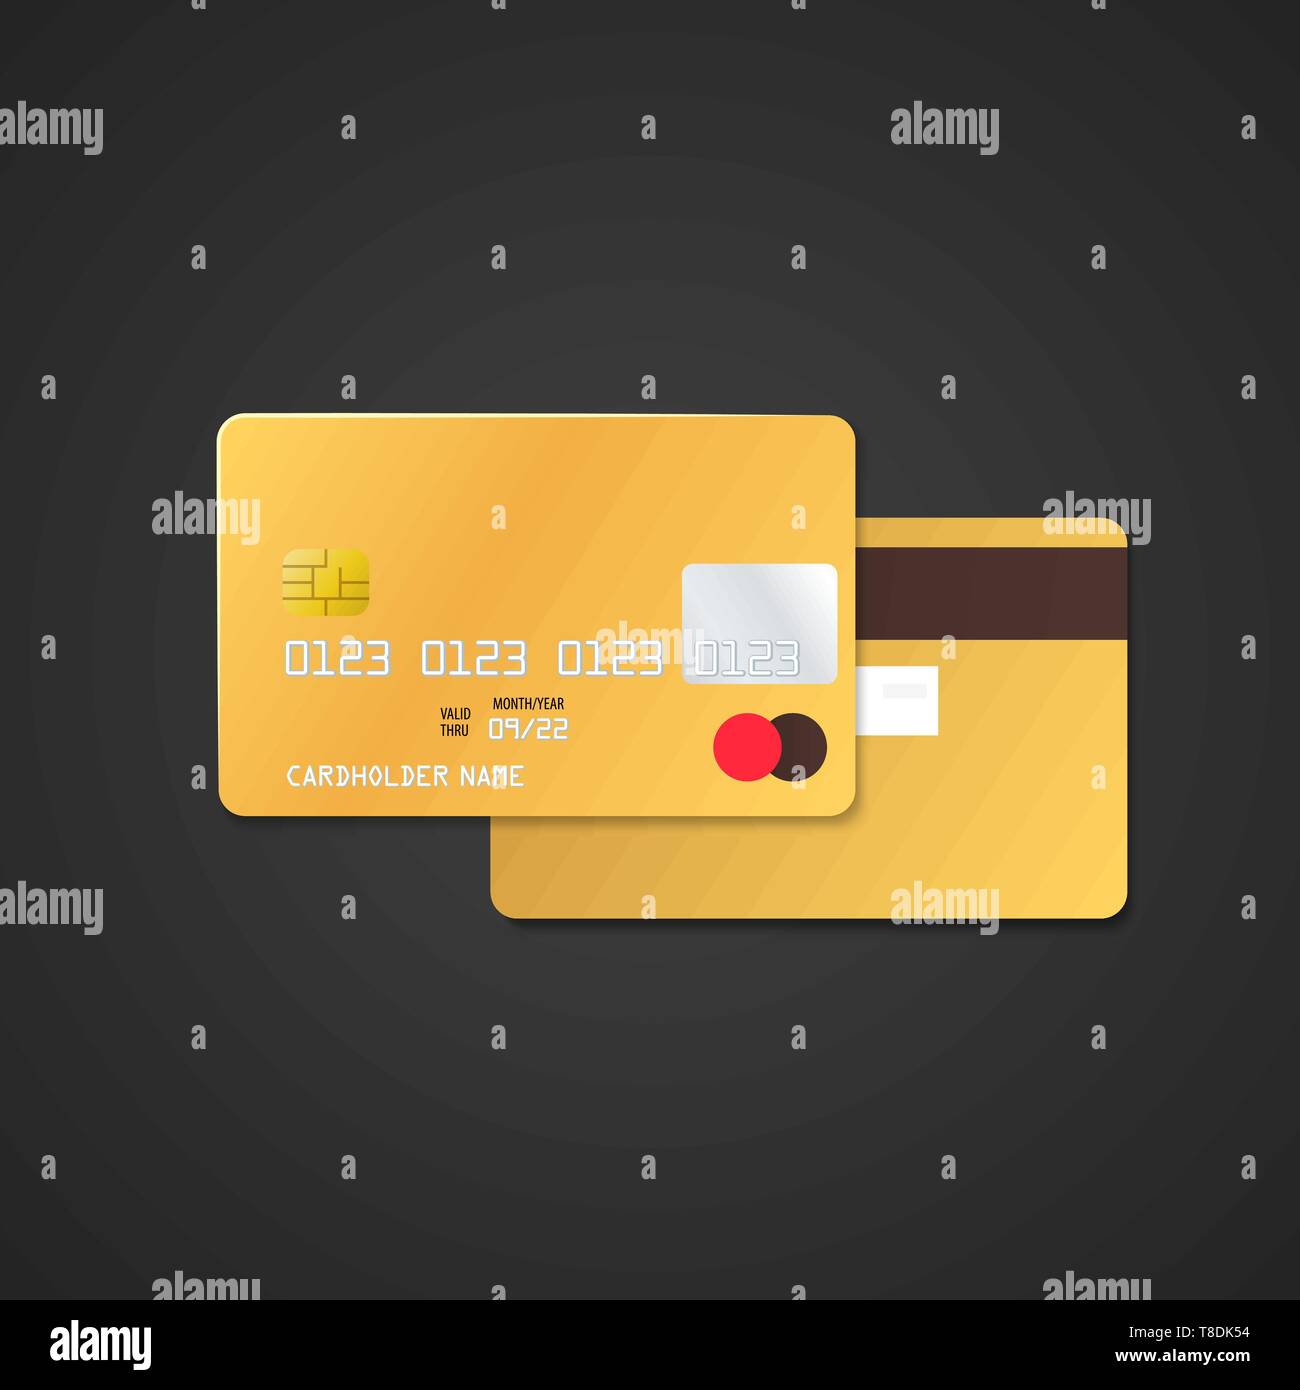 vector mock up gold vip blank plastic bank card face and back sides illustration realistic with shadow template design isolated on black background Stock Vector